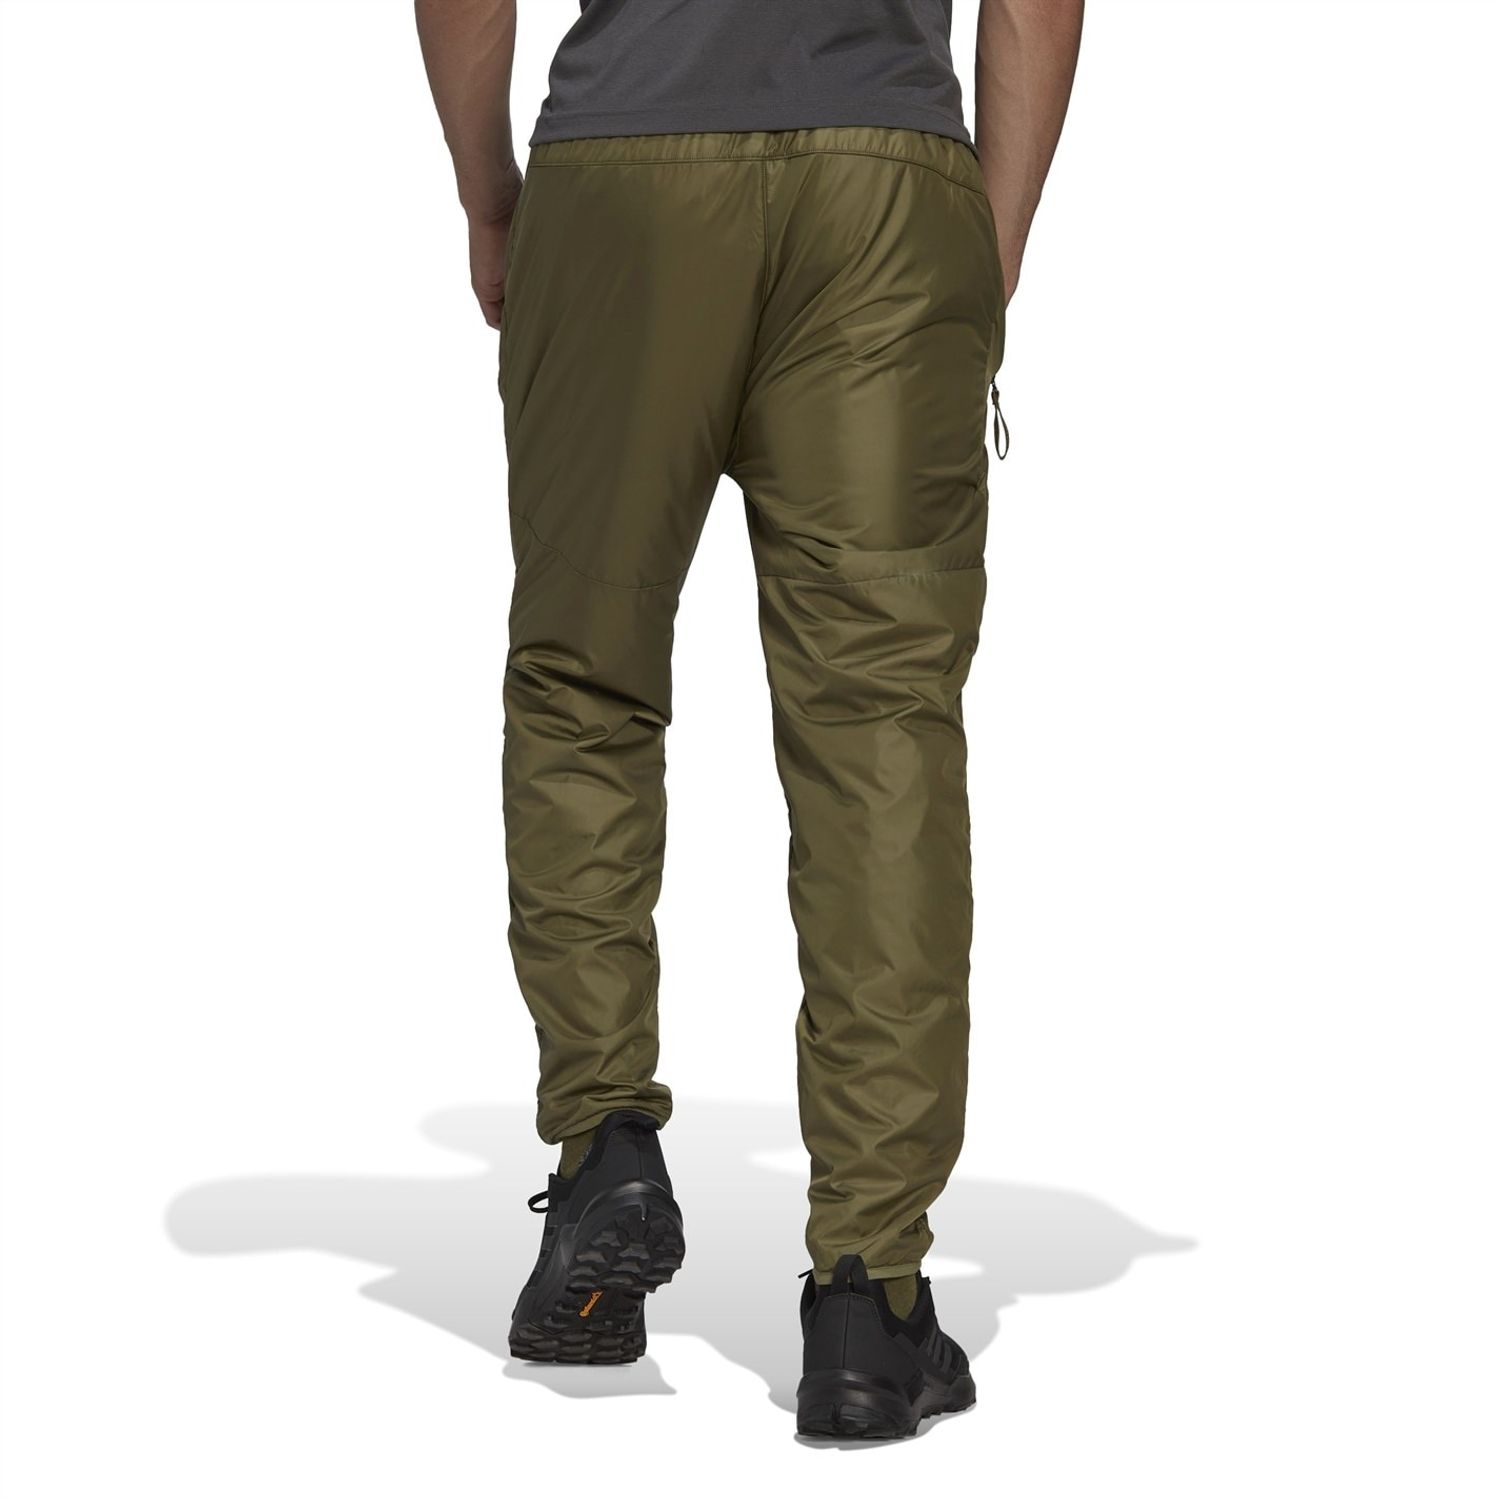 Green adidas Wind Pant - Get The Label